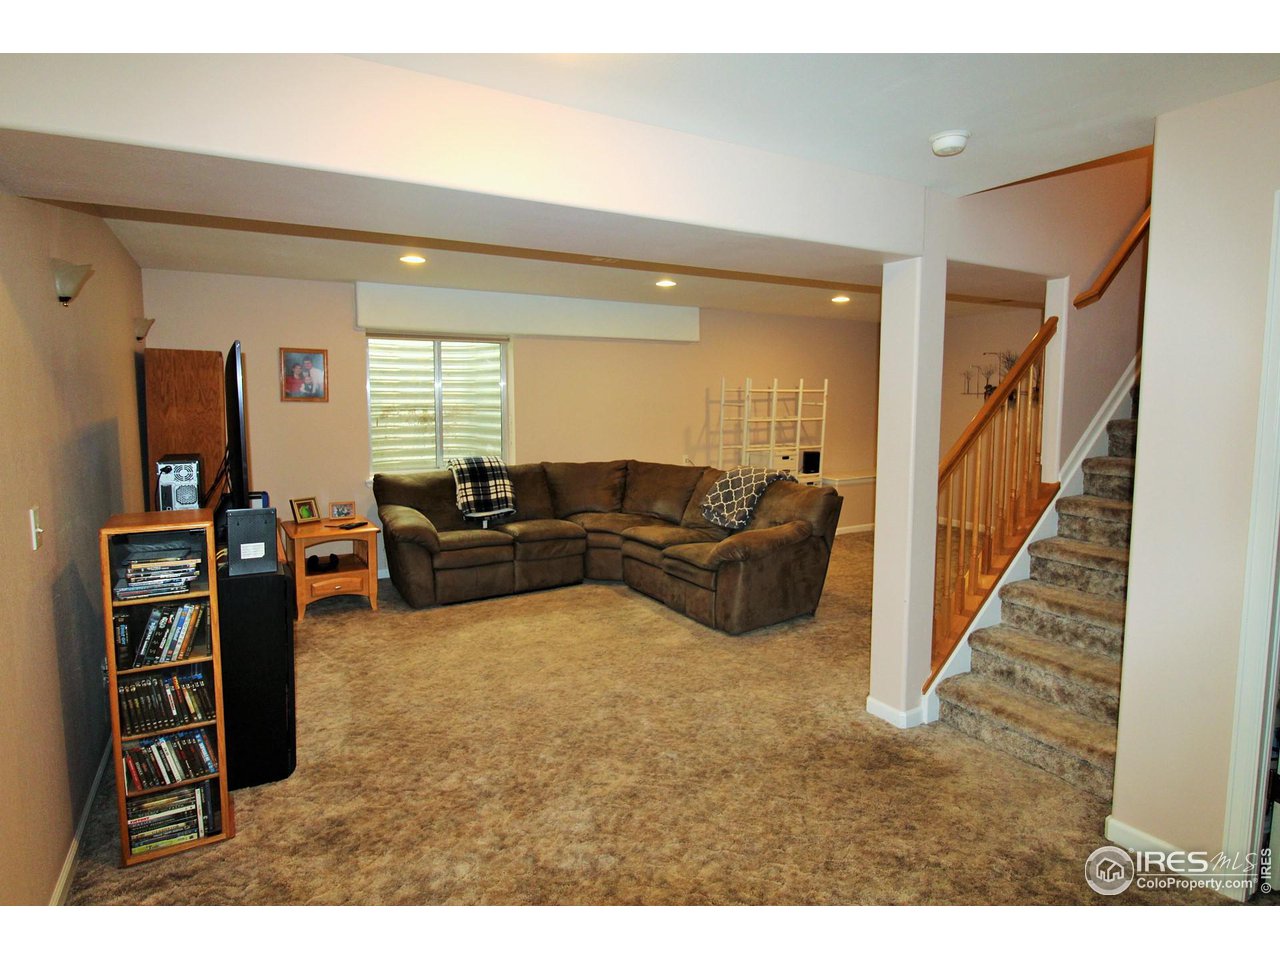 Amazing rec-room in basement makes a great home entertainment area.